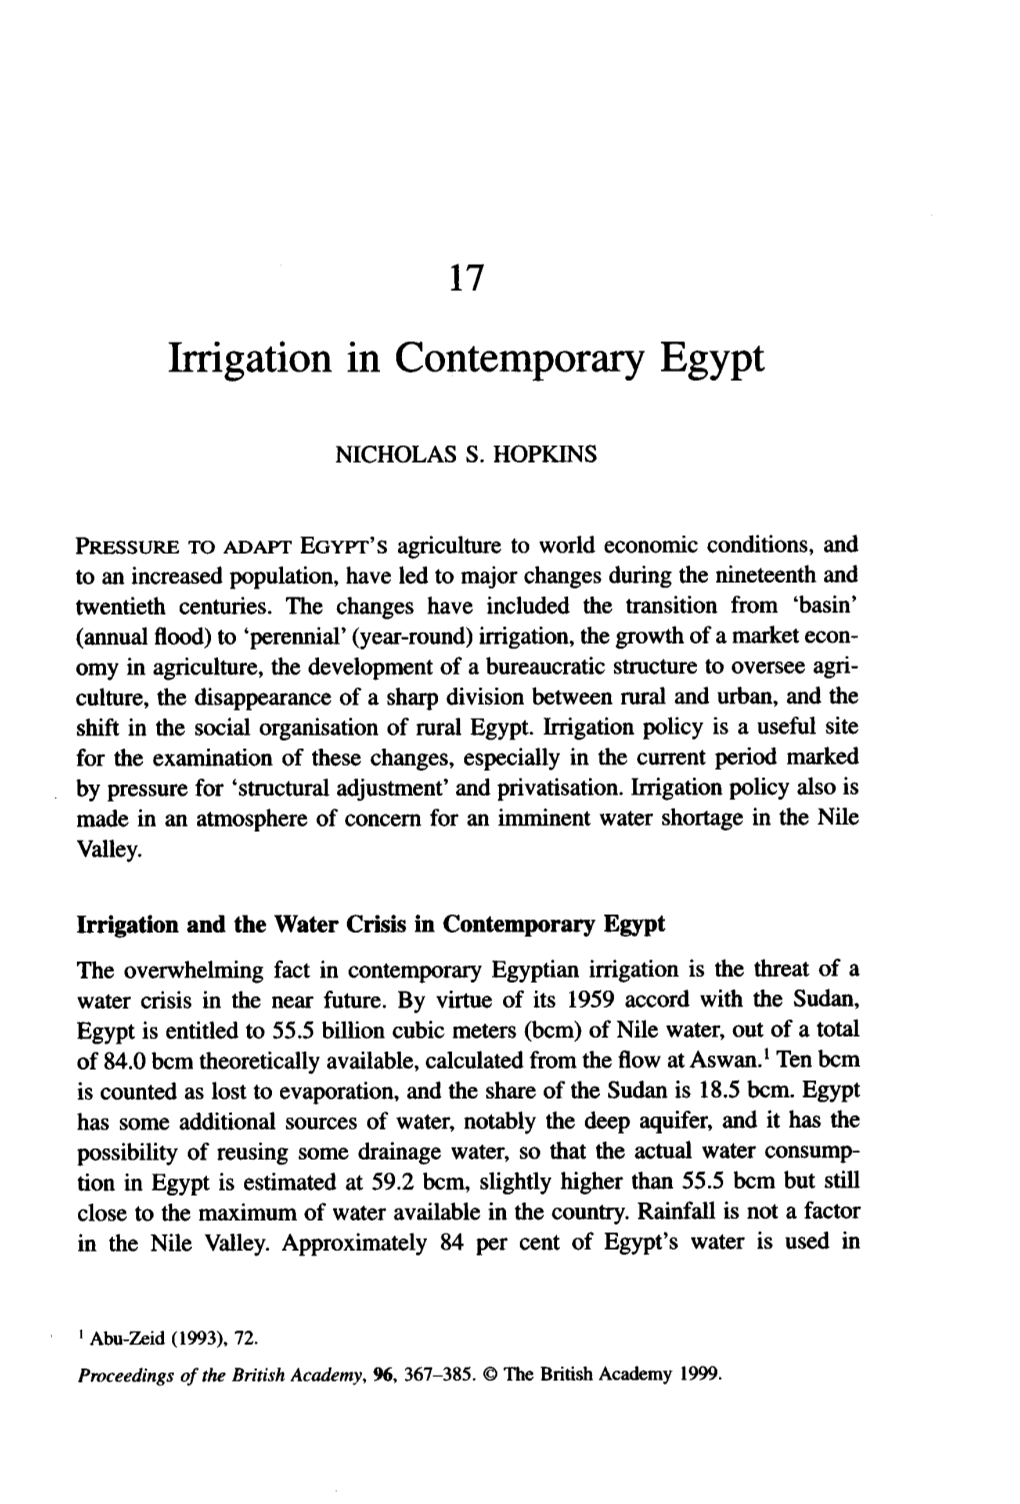 Irrigation in Contemporary Egypt